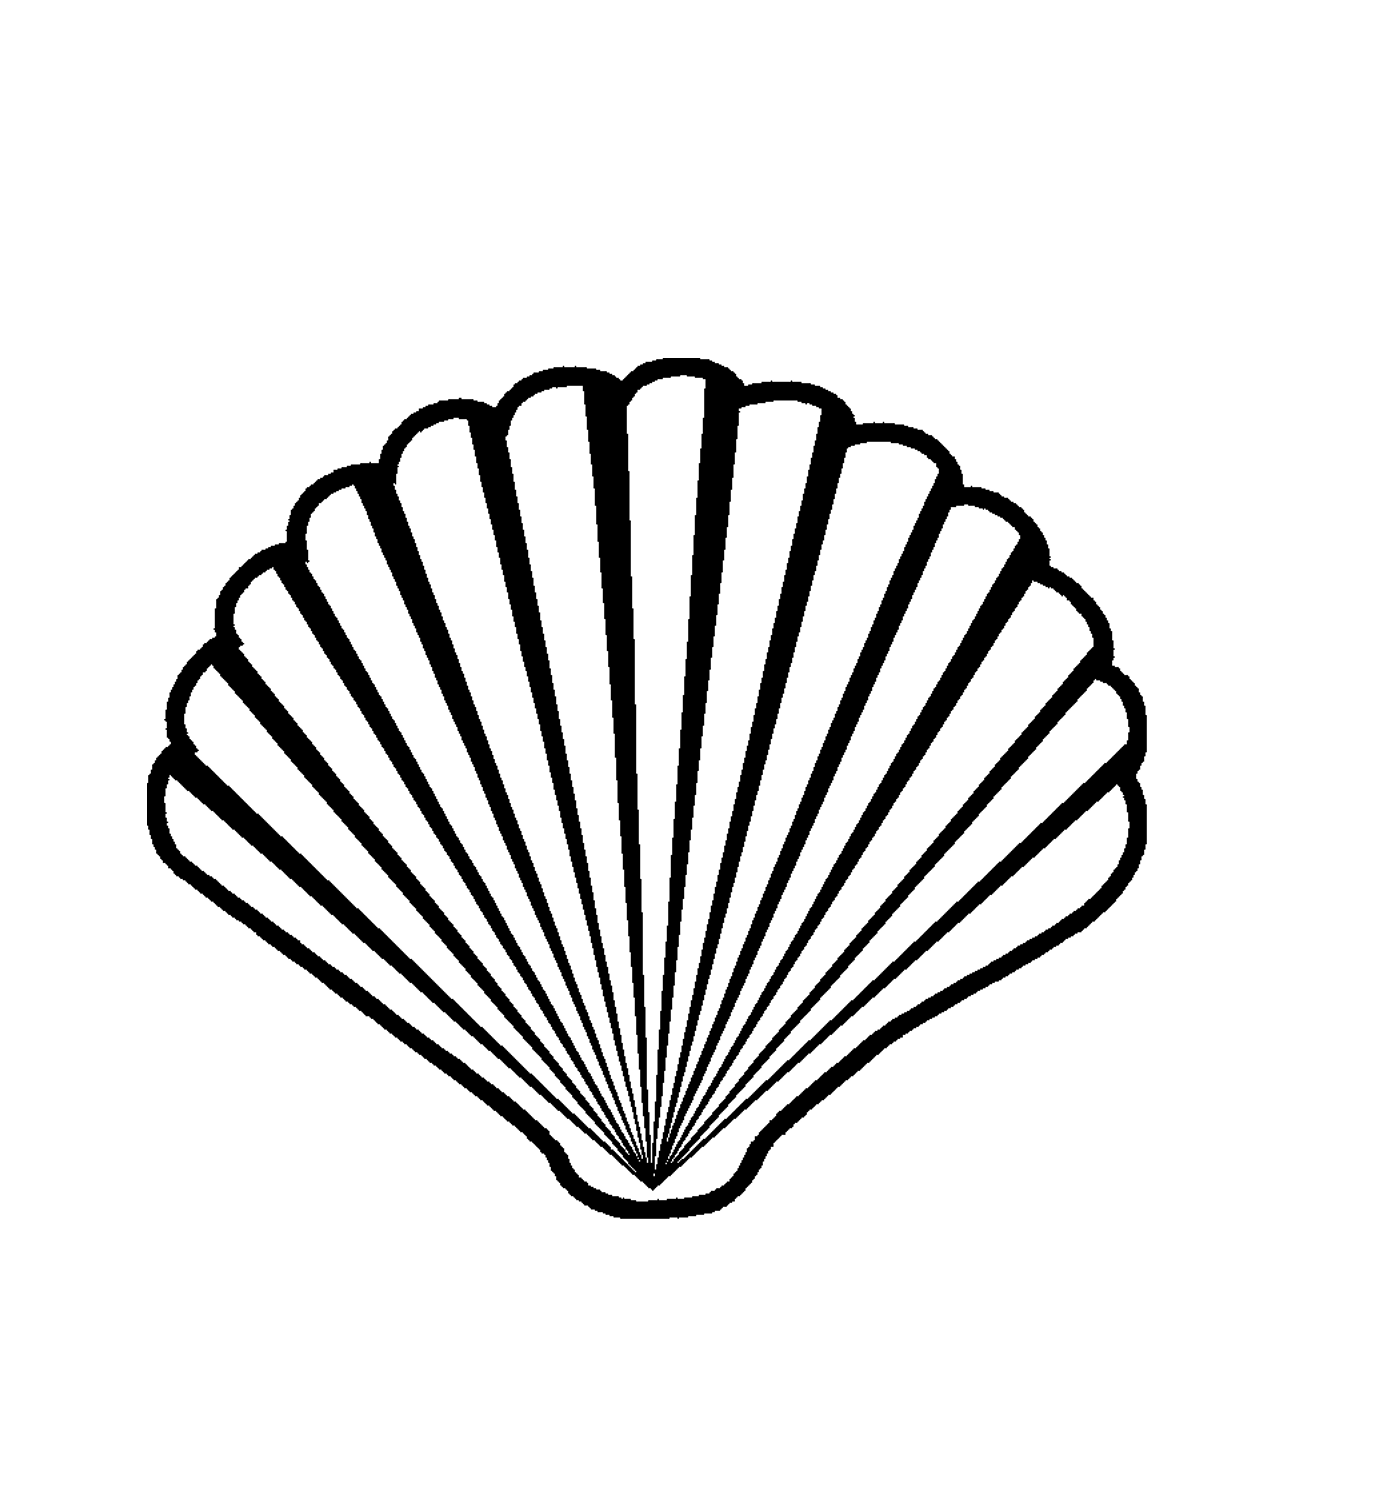 Scallop clipart #9, Download drawings